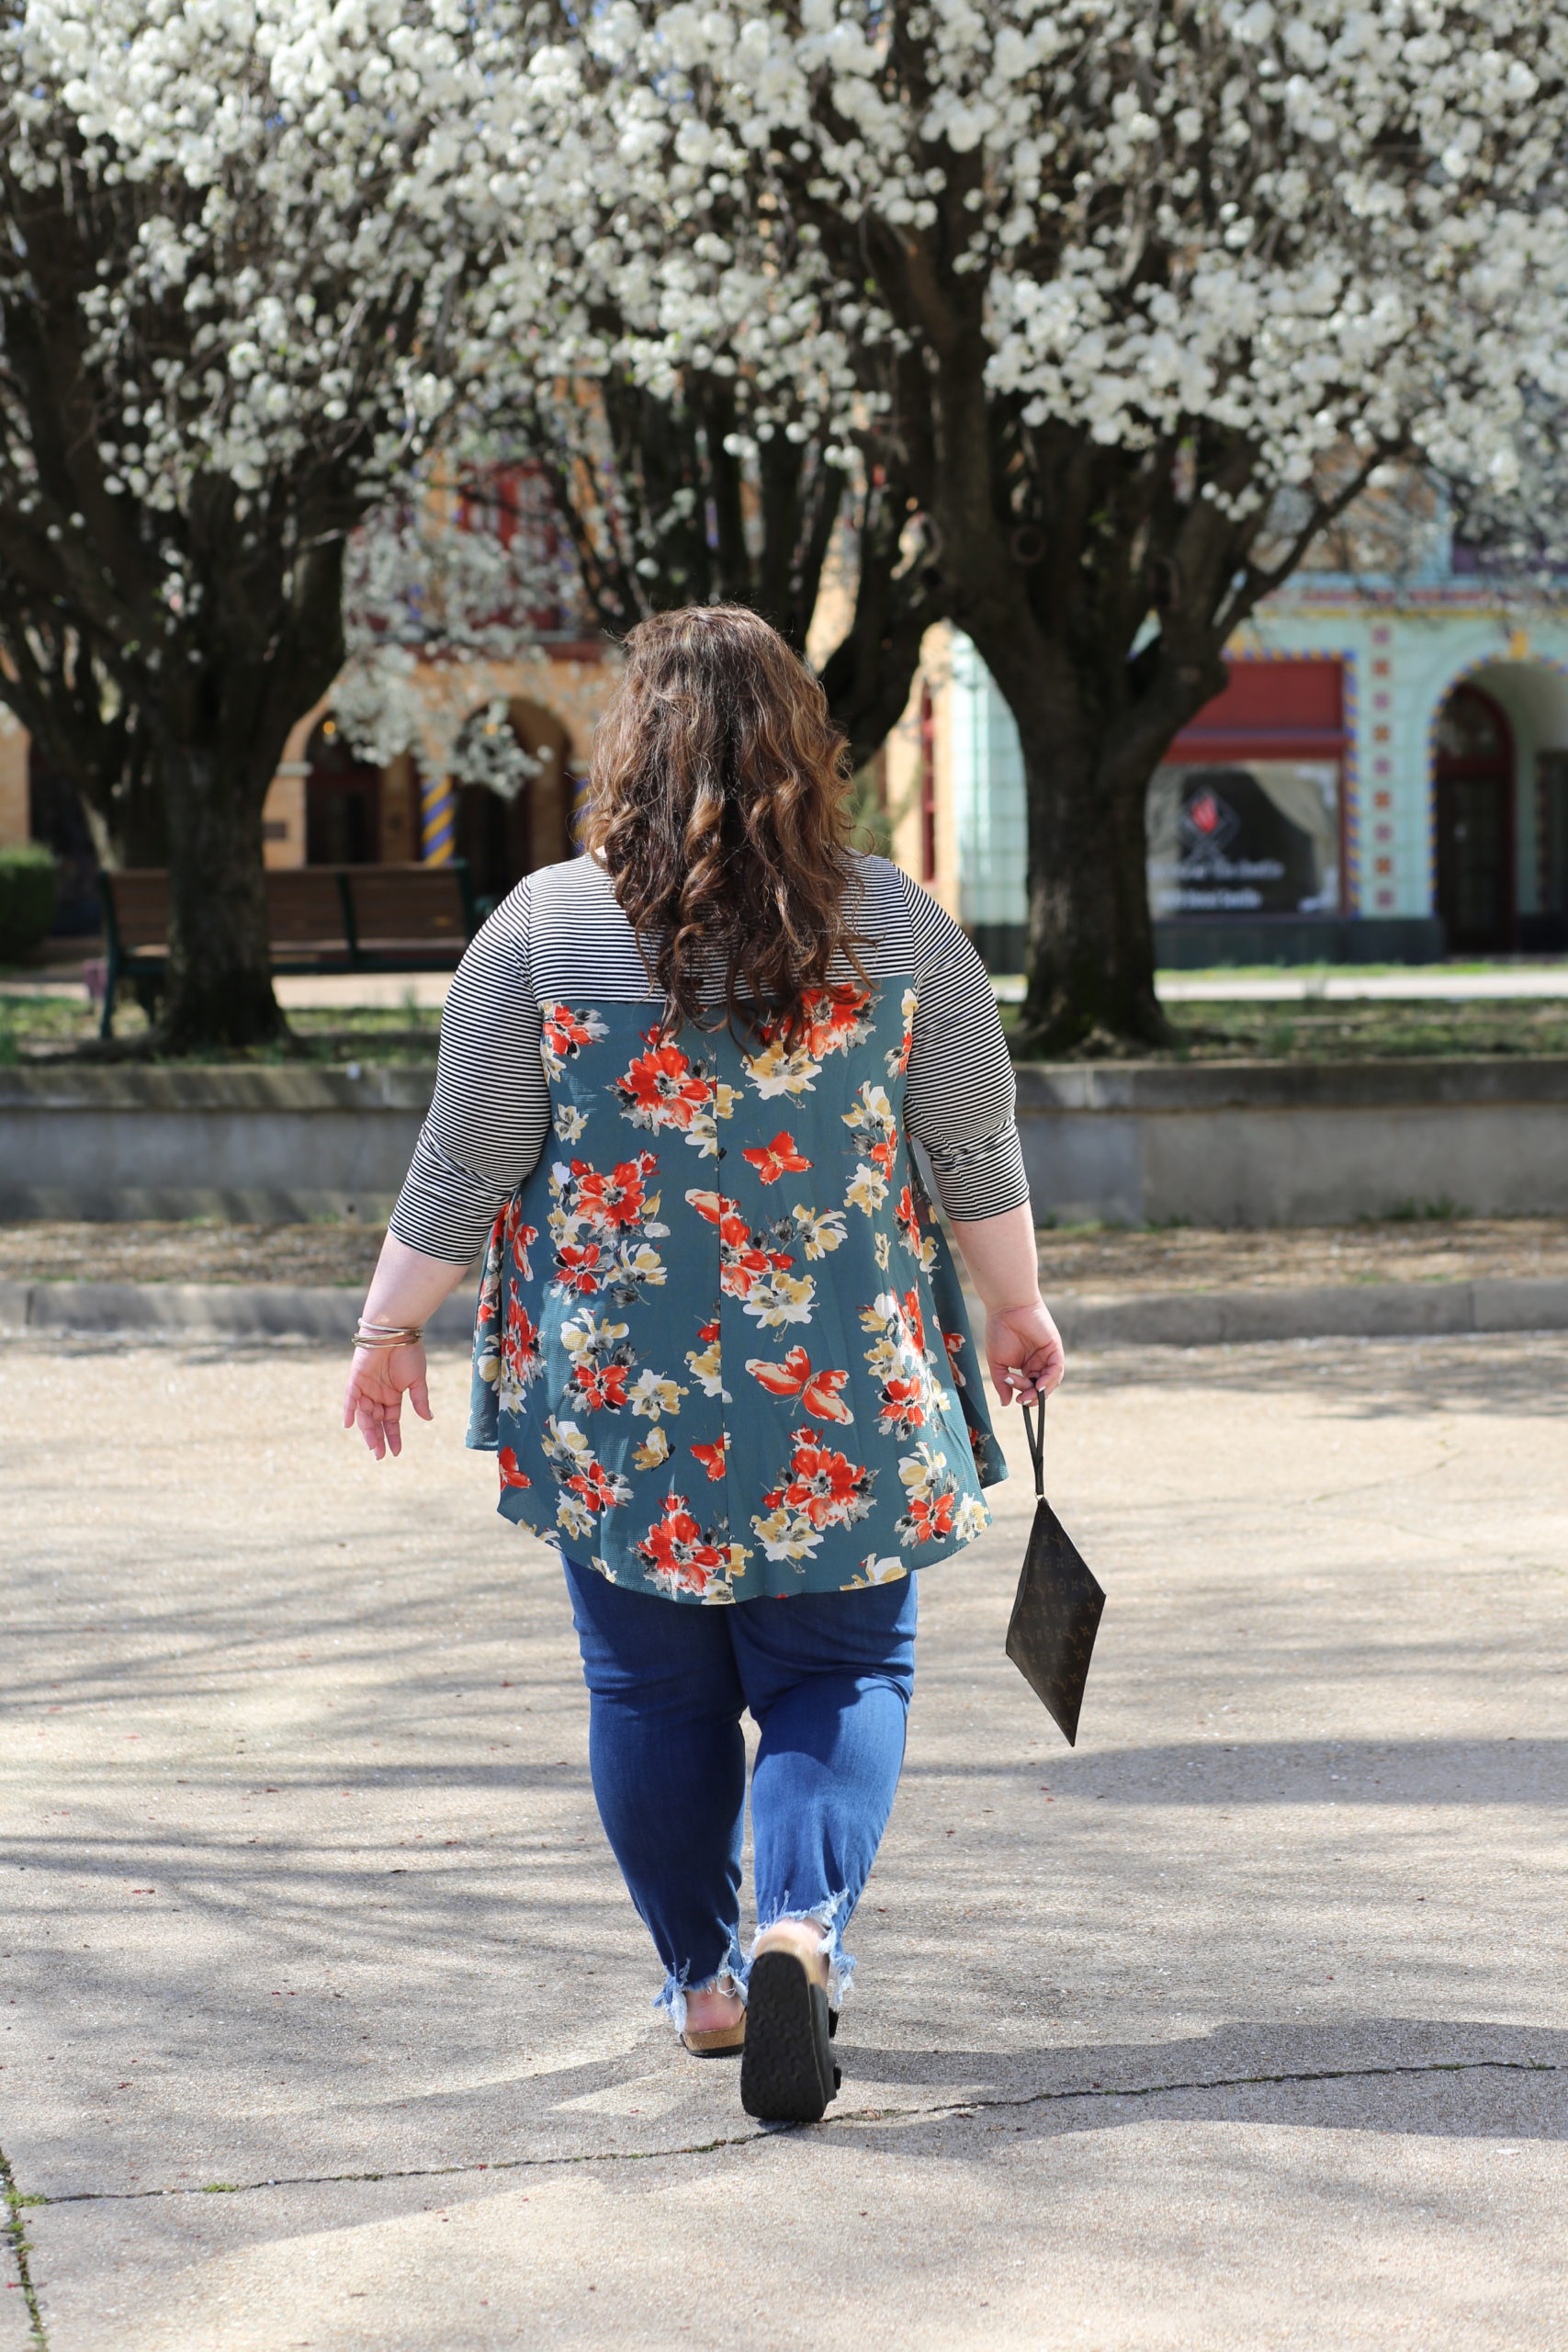 curvy boutique, the wandering willow, rebekaheliz, rebekahelizstyle, curvy style, plus size style, plus size blogger, spring style